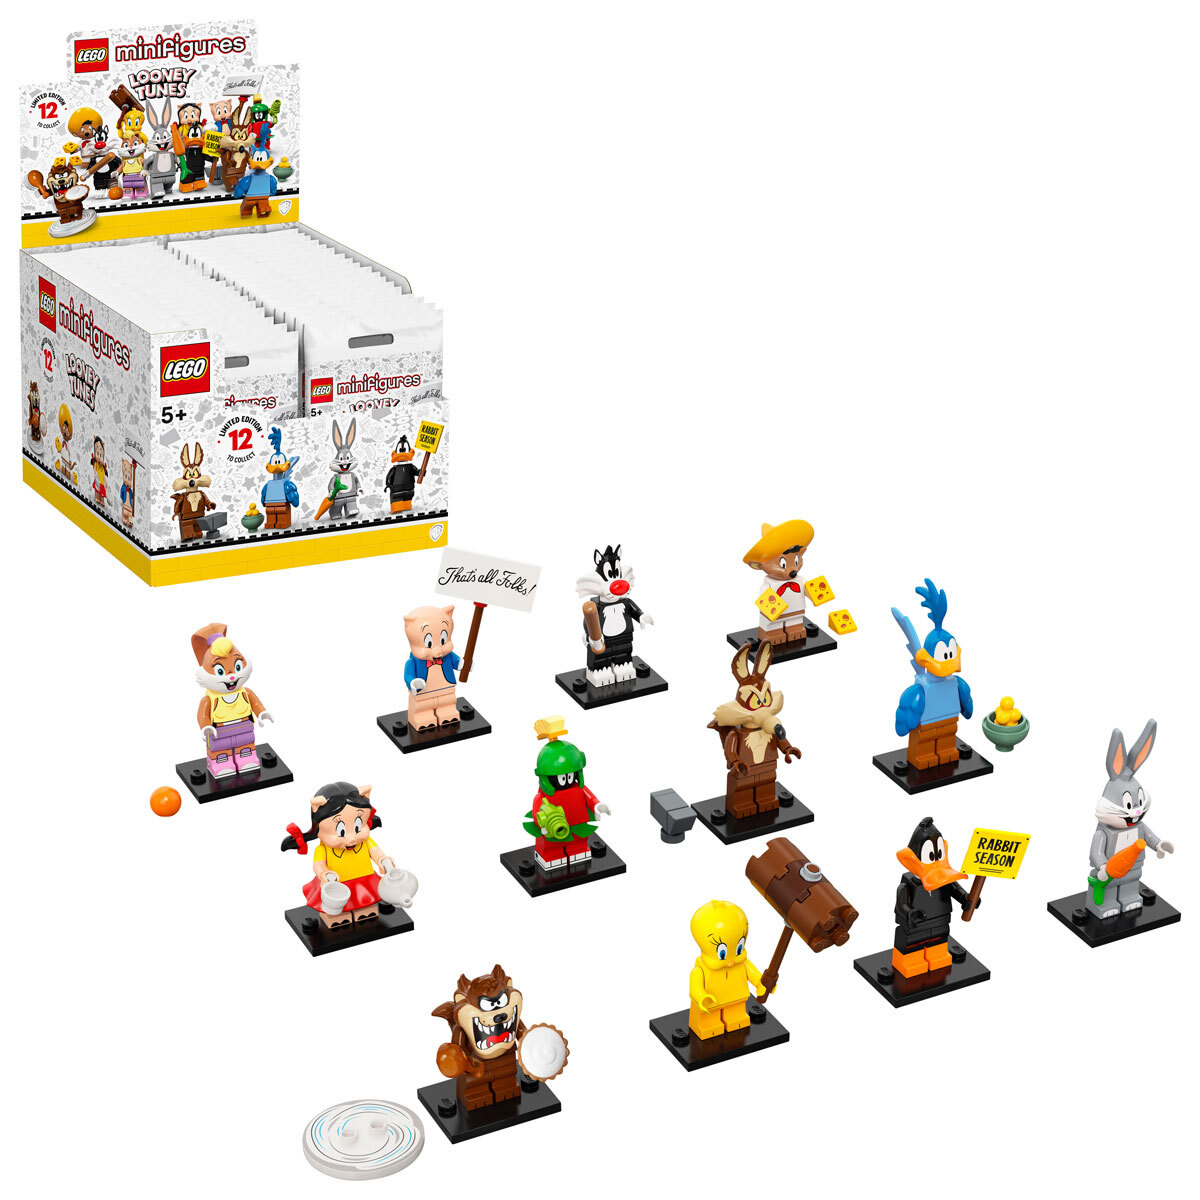 Buy LEGO Minifigures Looney Tunes 71030 Package & Figures Image at Costco.co.uk